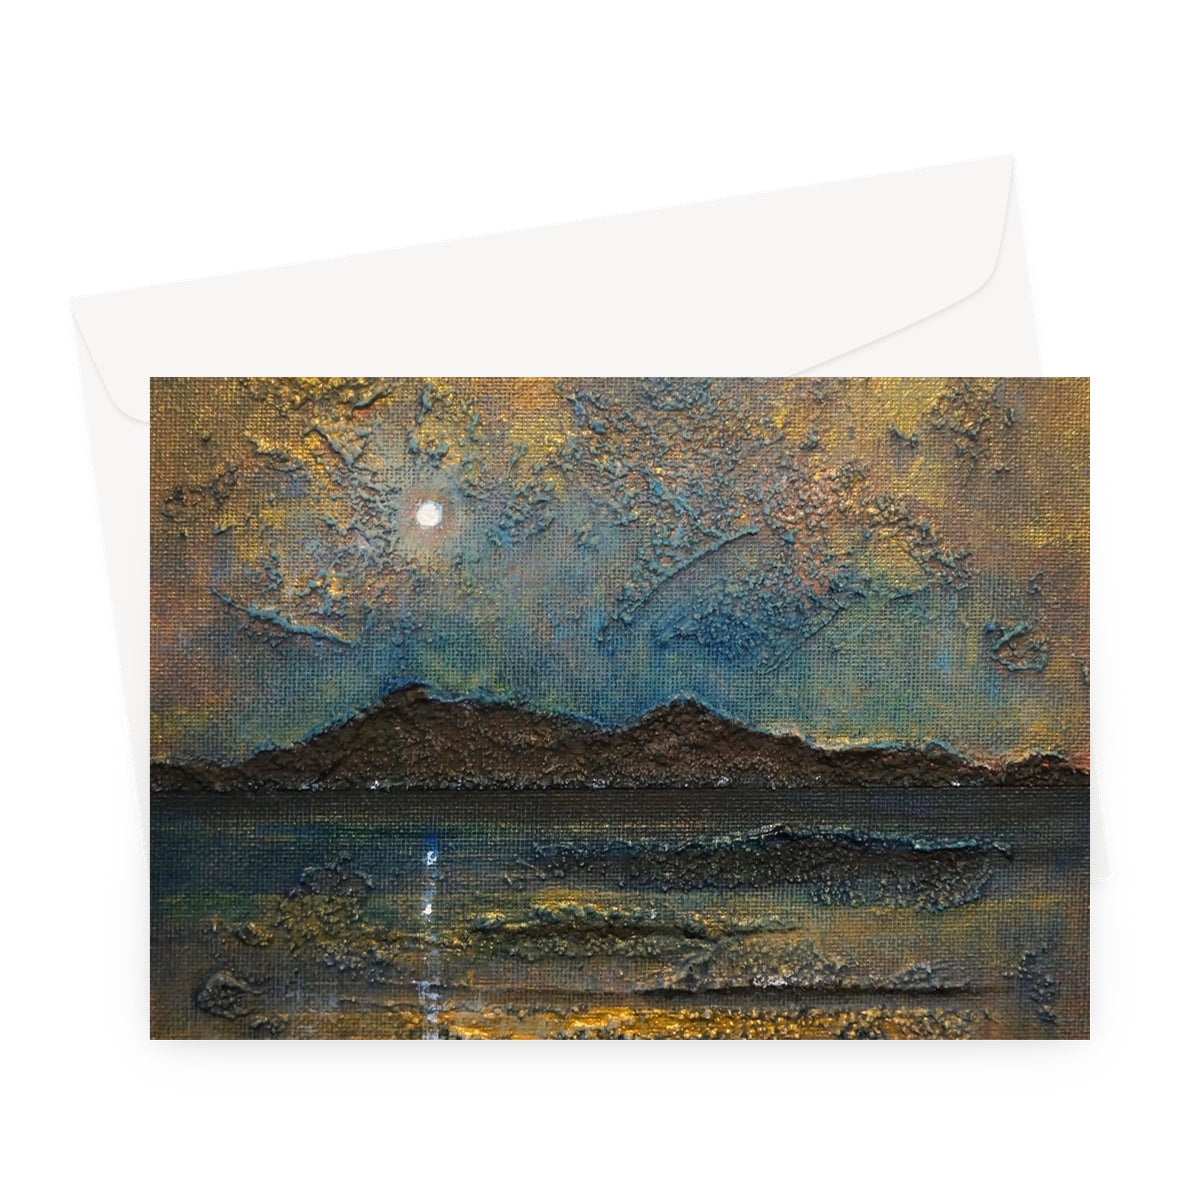 Arran Moonlight Art Gifts Greeting Card-Greetings Cards-Arran Art Gallery-A5 Landscape-10 Cards-Paintings, Prints, Homeware, Art Gifts From Scotland By Scottish Artist Kevin Hunter